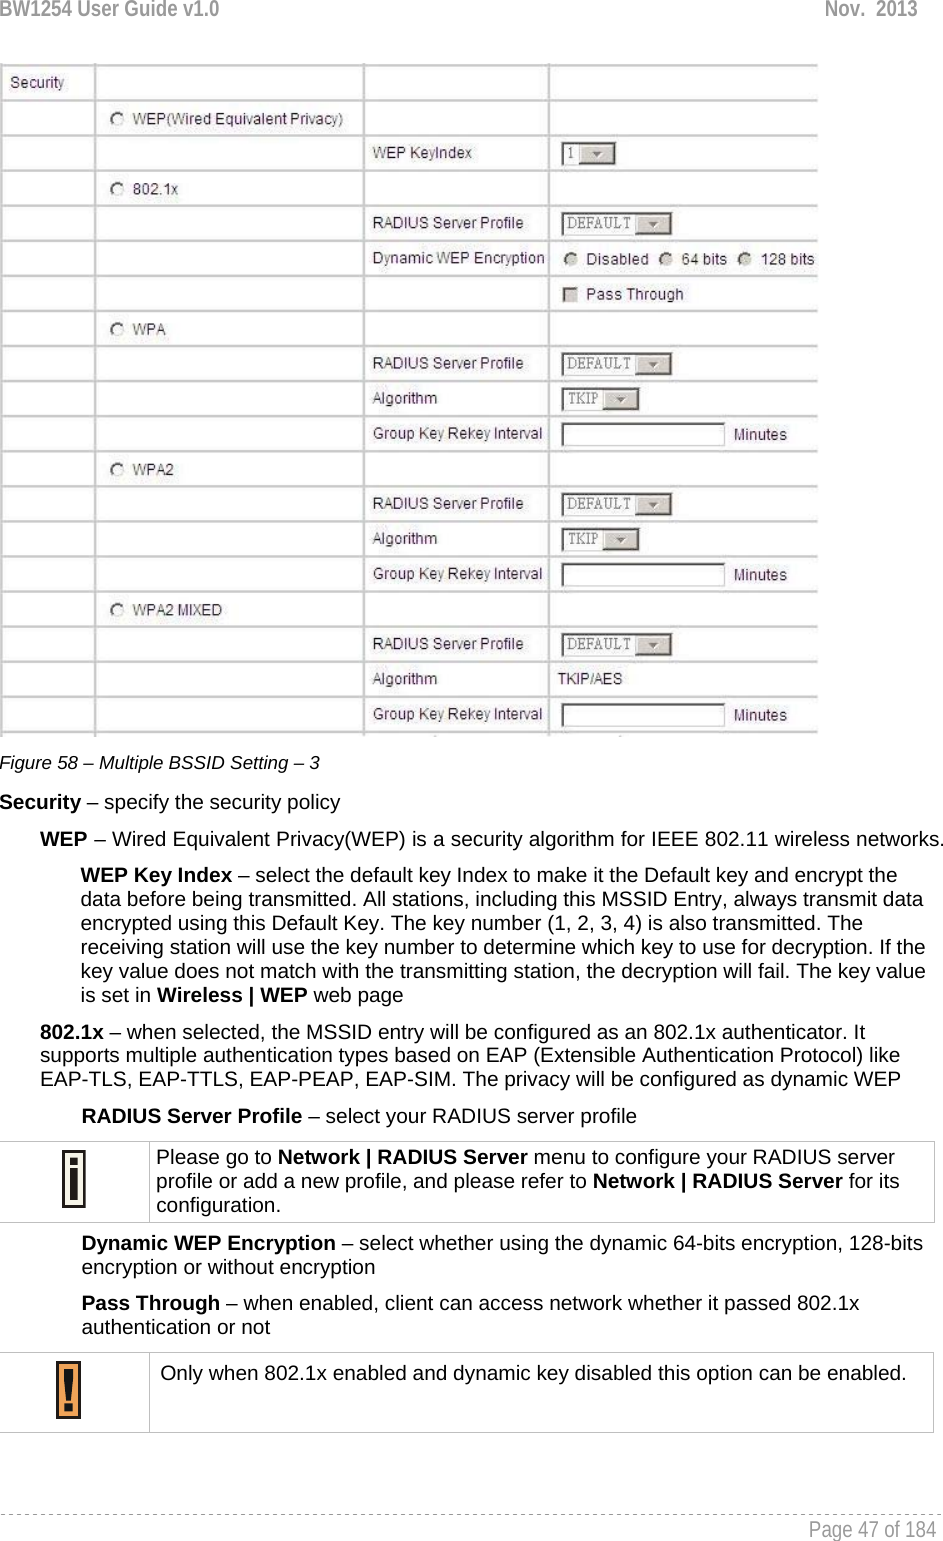 BW1254 User Guide v1.0  Nov.  2013     Page 47 of 184    Figure 58 – Multiple BSSID Setting – 3 Security – specify the security policy WEP – Wired Equivalent Privacy(WEP) is a security algorithm for IEEE 802.11 wireless networks. WEP Key Index – select the default key Index to make it the Default key and encrypt the data before being transmitted. All stations, including this MSSID Entry, always transmit data encrypted using this Default Key. The key number (1, 2, 3, 4) is also transmitted. The receiving station will use the key number to determine which key to use for decryption. If the key value does not match with the transmitting station, the decryption will fail. The key value is set in Wireless | WEP web page 802.1x – when selected, the MSSID entry will be configured as an 802.1x authenticator. It supports multiple authentication types based on EAP (Extensible Authentication Protocol) like EAP-TLS, EAP-TTLS, EAP-PEAP, EAP-SIM. The privacy will be configured as dynamic WEP RADIUS Server Profile – select your RADIUS server profile  Please go to Network | RADIUS Server menu to configure your RADIUS server profile or add a new profile, and please refer to Network | RADIUS Server for its configuration. Dynamic WEP Encryption – select whether using the dynamic 64-bits encryption, 128-bits encryption or without encryption Pass Through – when enabled, client can access network whether it passed 802.1x authentication or not  Only when 802.1x enabled and dynamic key disabled this option can be enabled.  